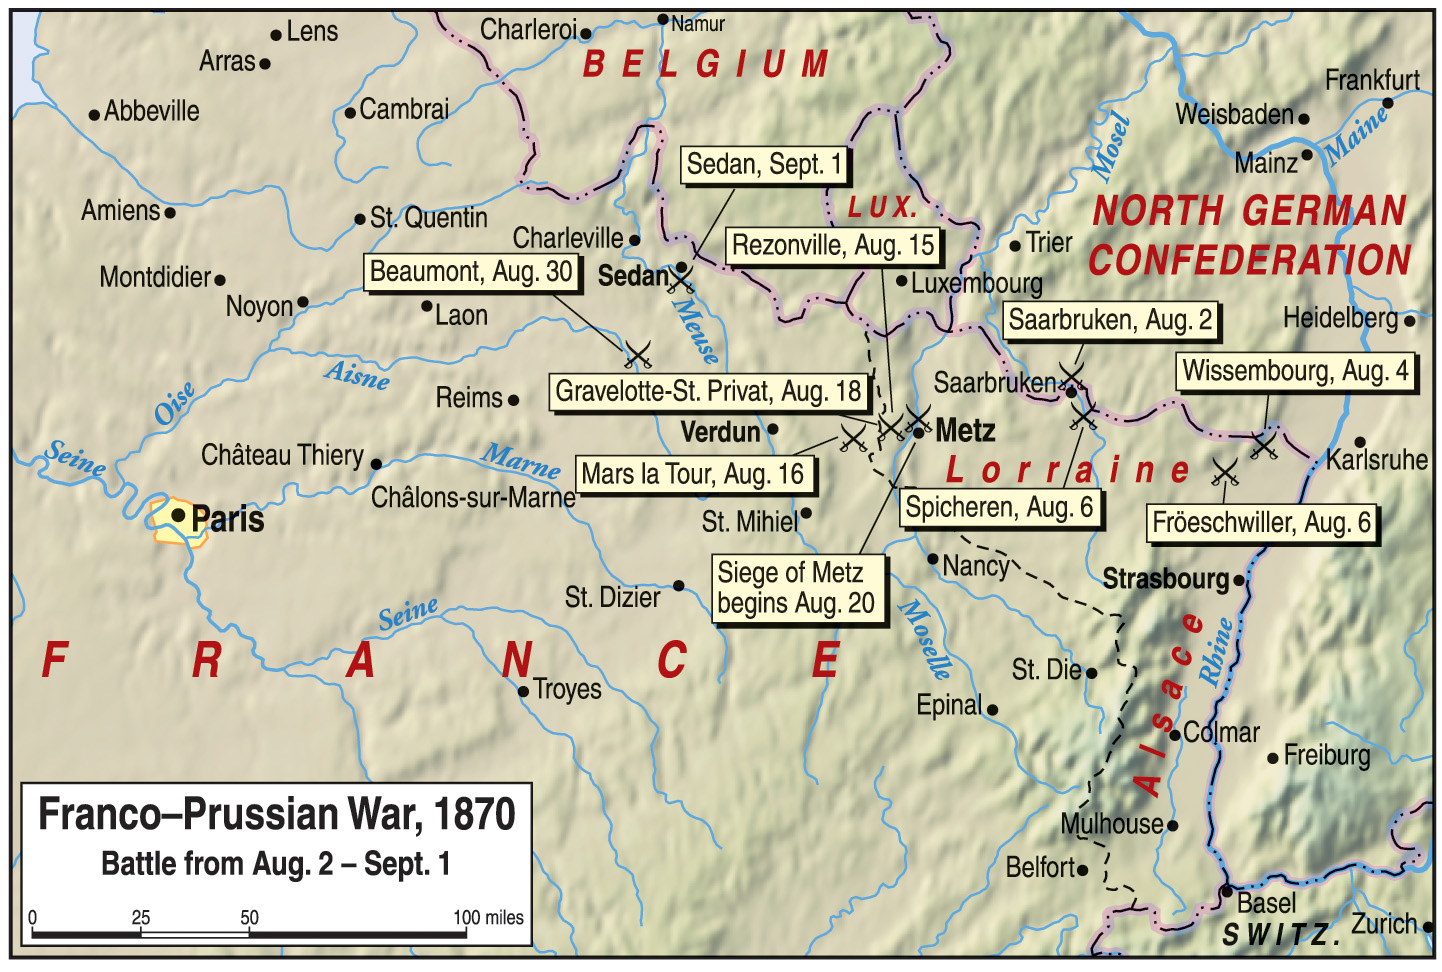 The Franco-Prussian War largely played out along the northeastern border of France south of Luxembourg.